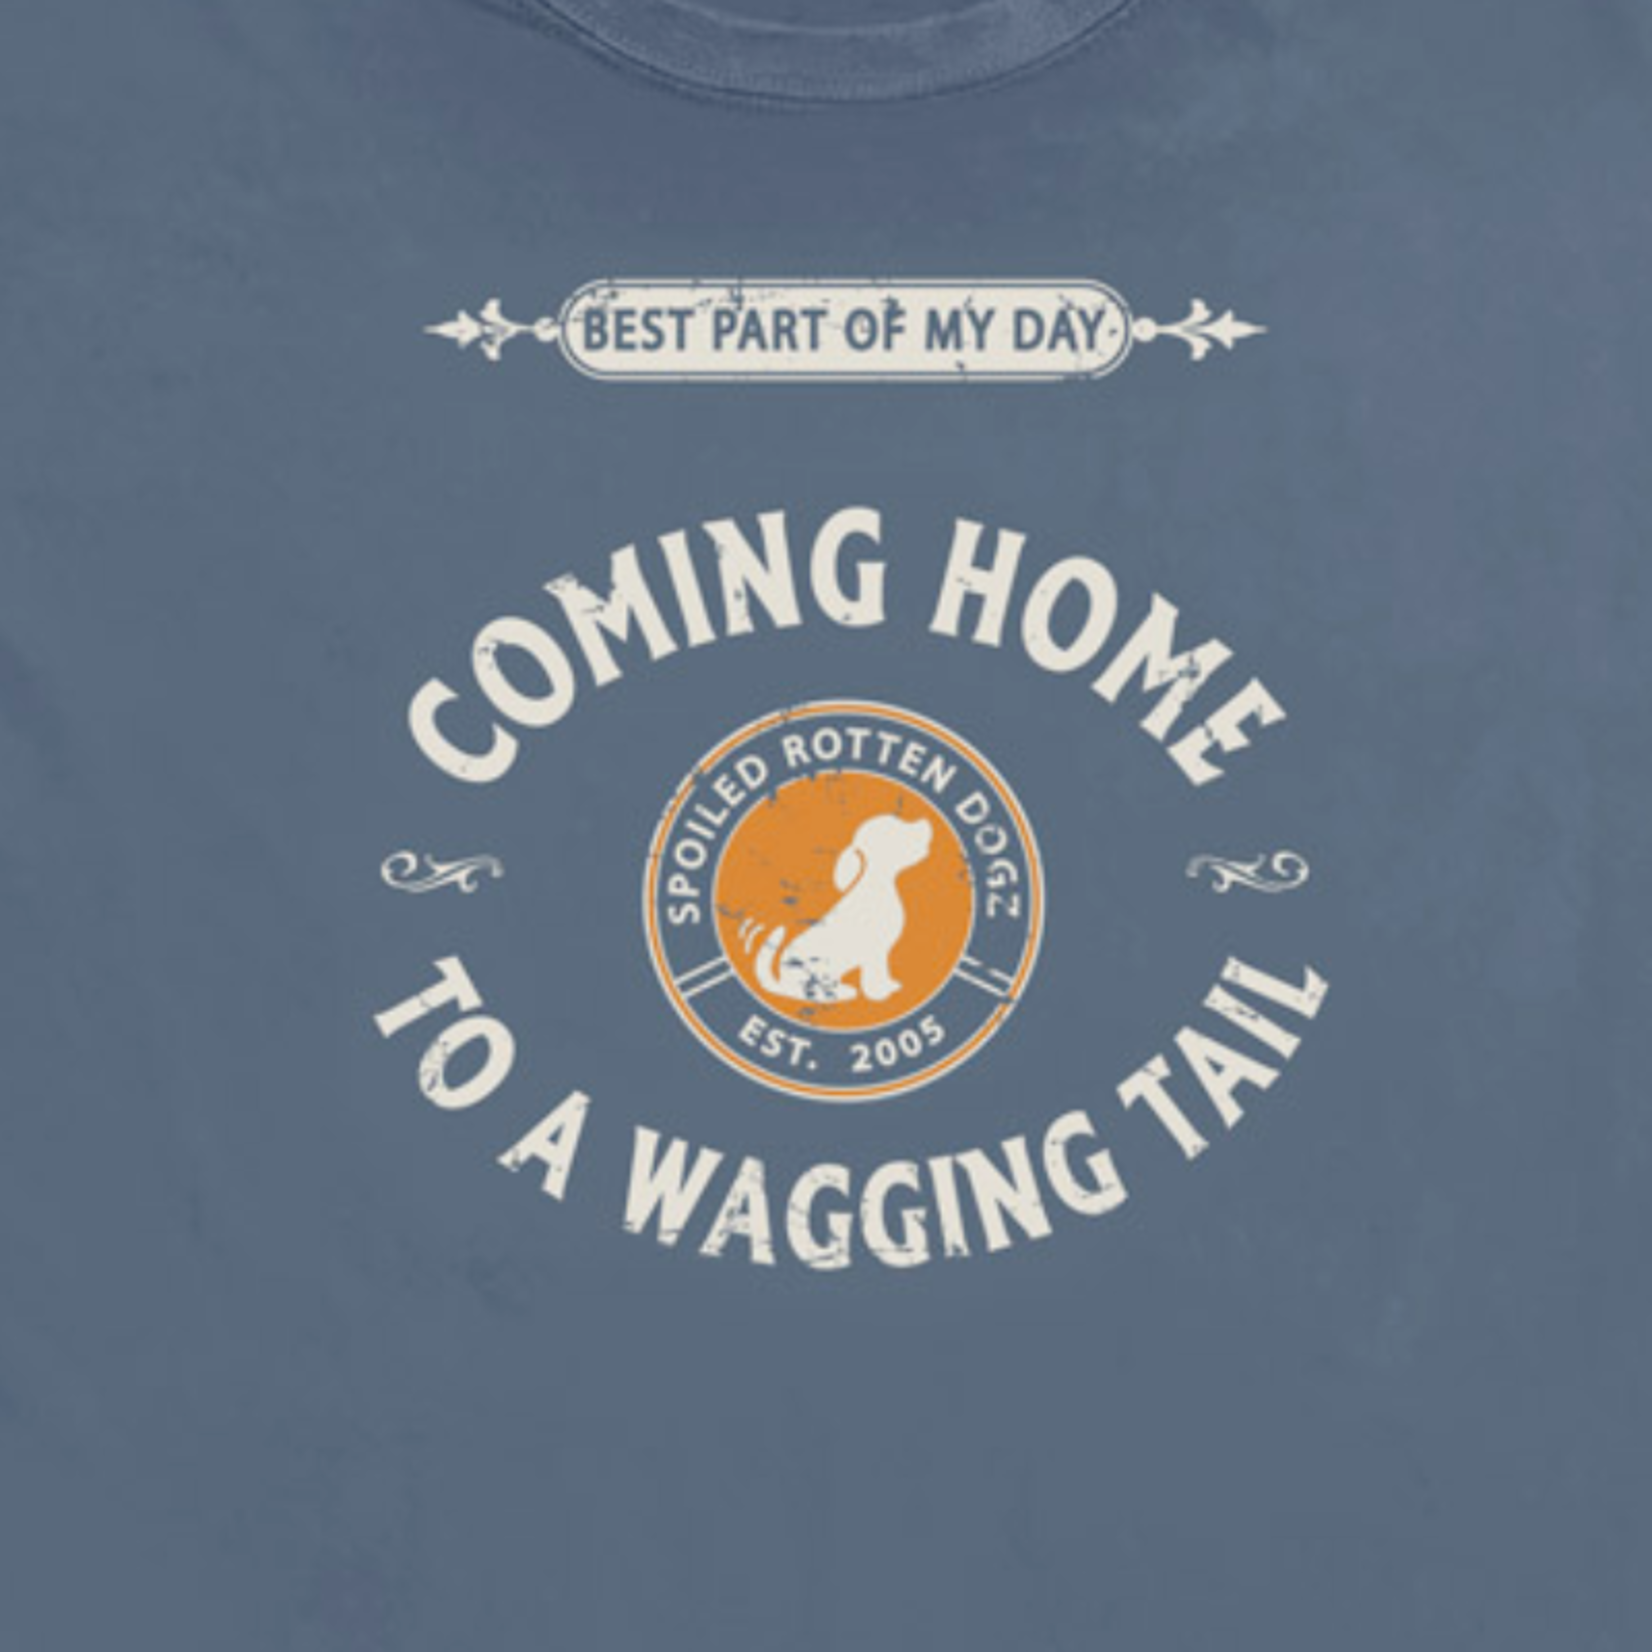 Spoiled Rotten Dogz Coming Home to a Wagging Tail - T-Shirt - Spoiled Rotten Dogz